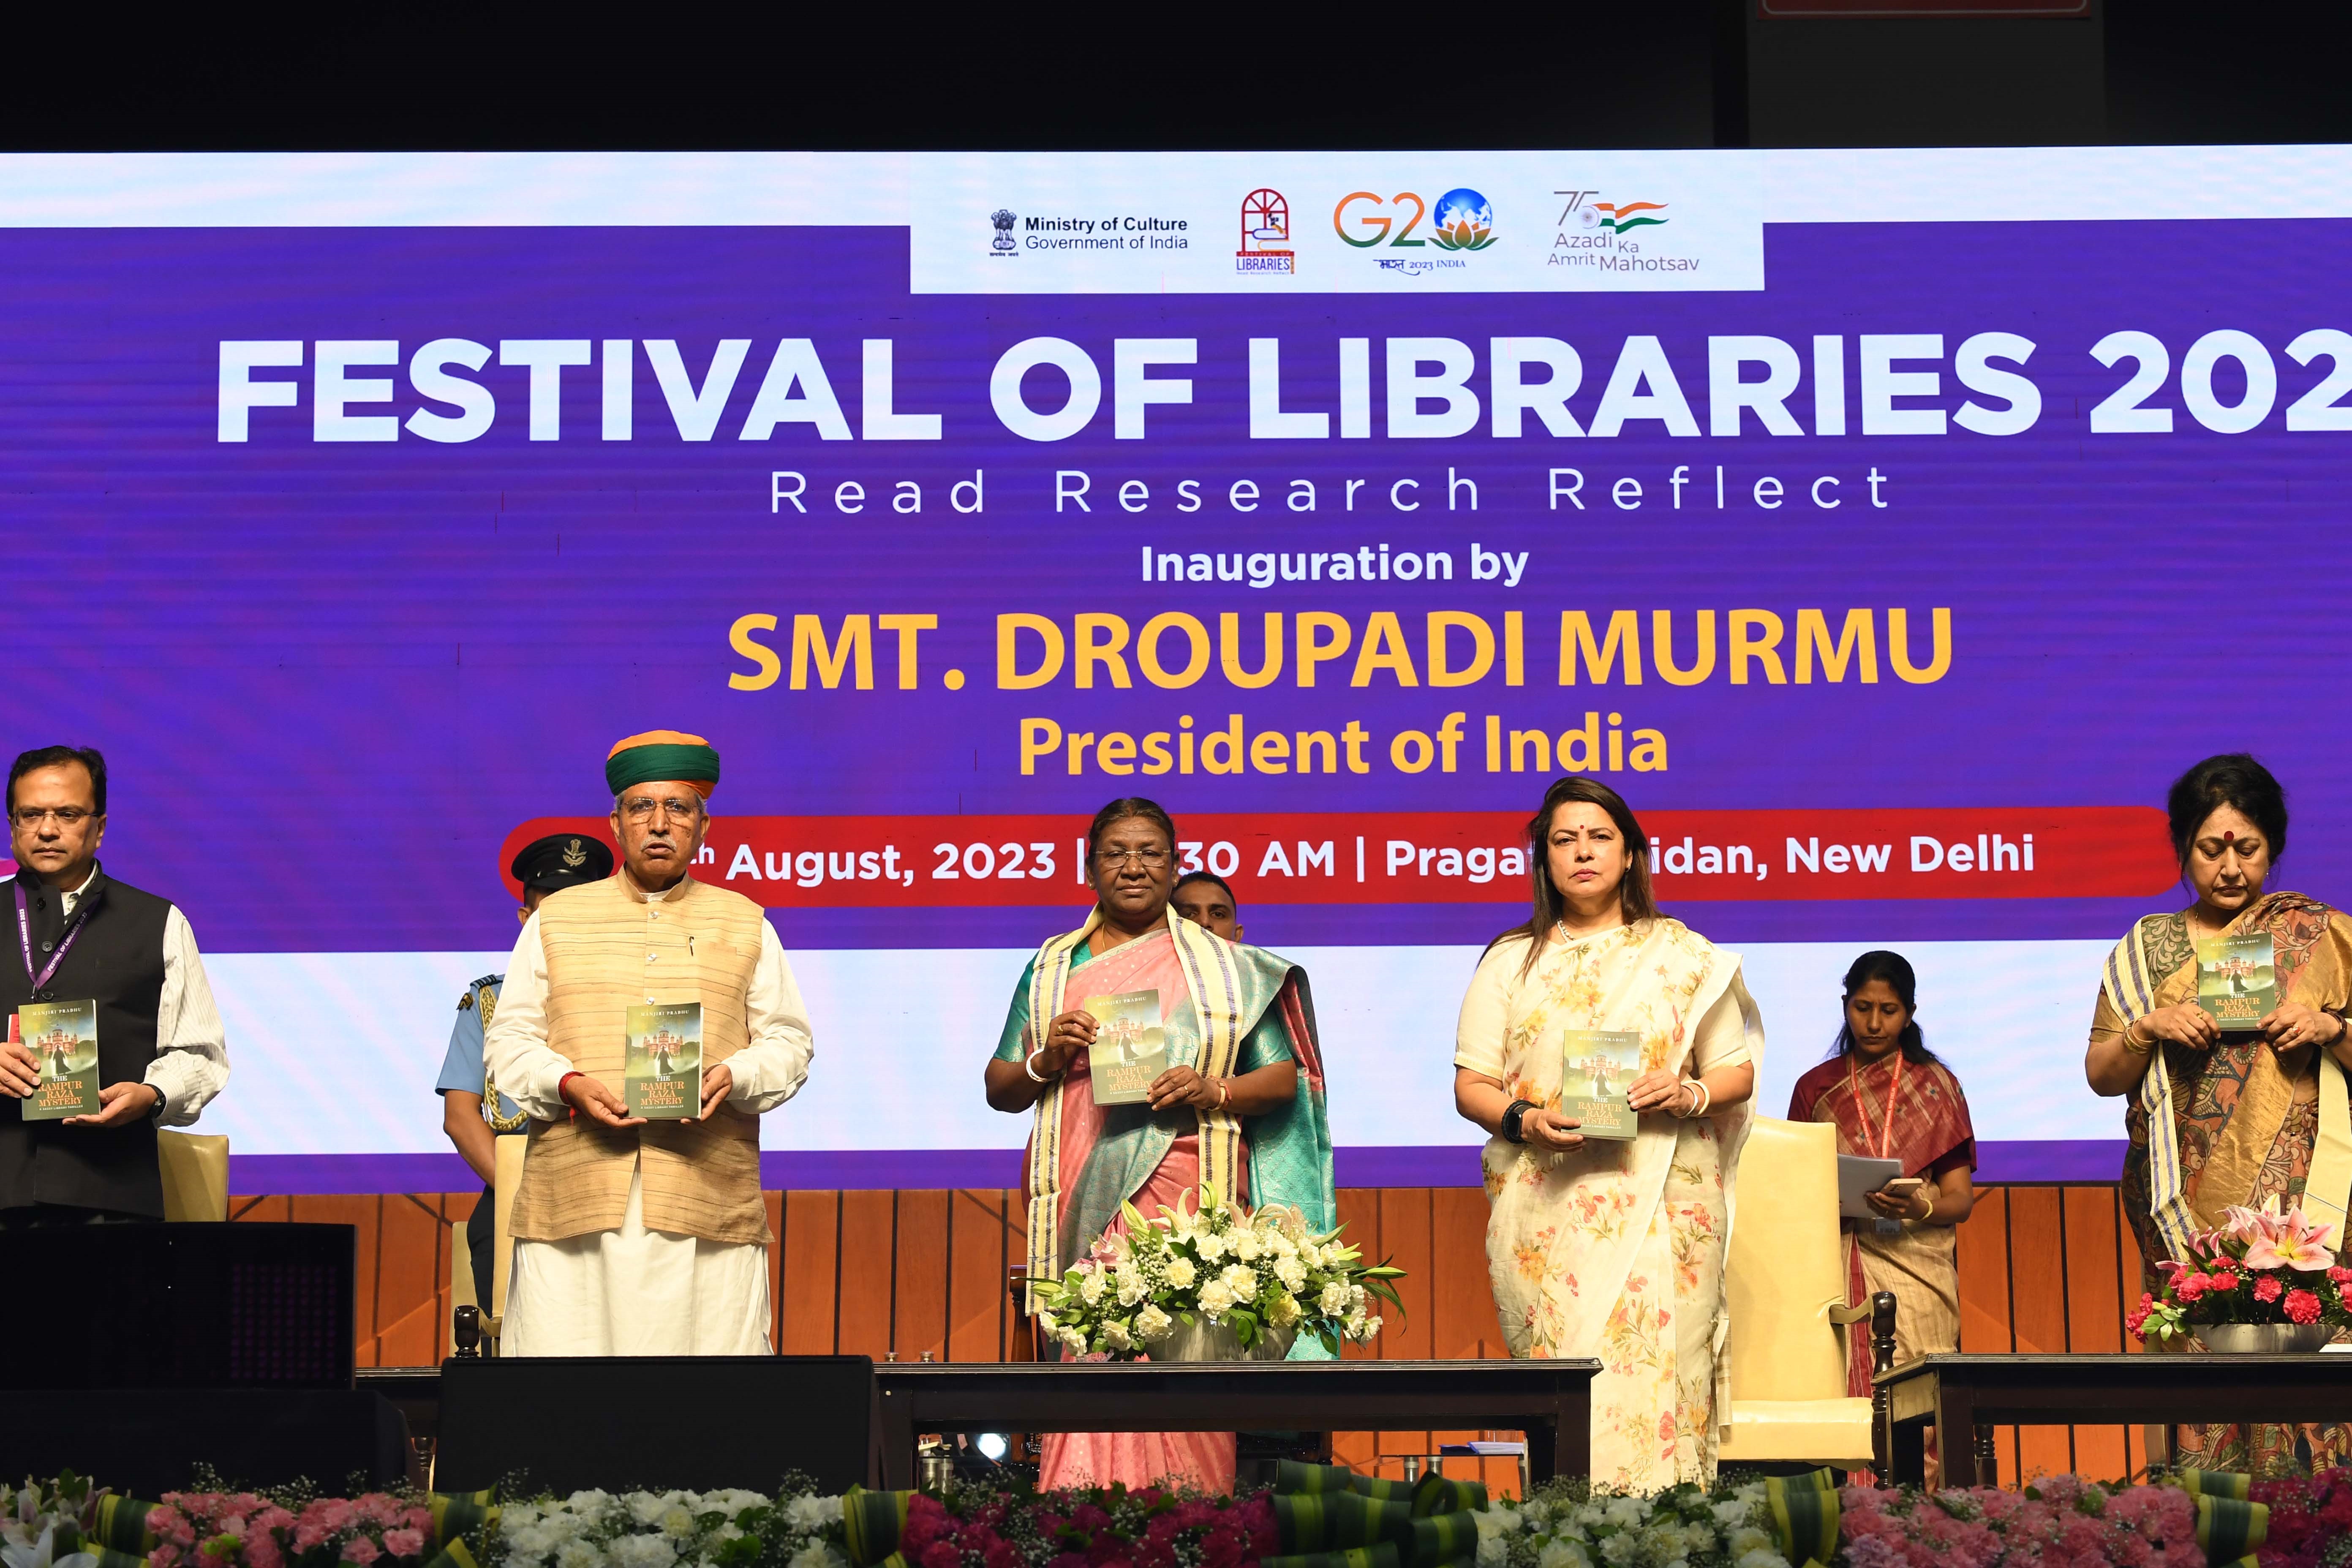 The President of India, Smt Droupadi Murmu inaugurated the ‘Festival of Libraries’ in New Delhi on August 5, 2023.